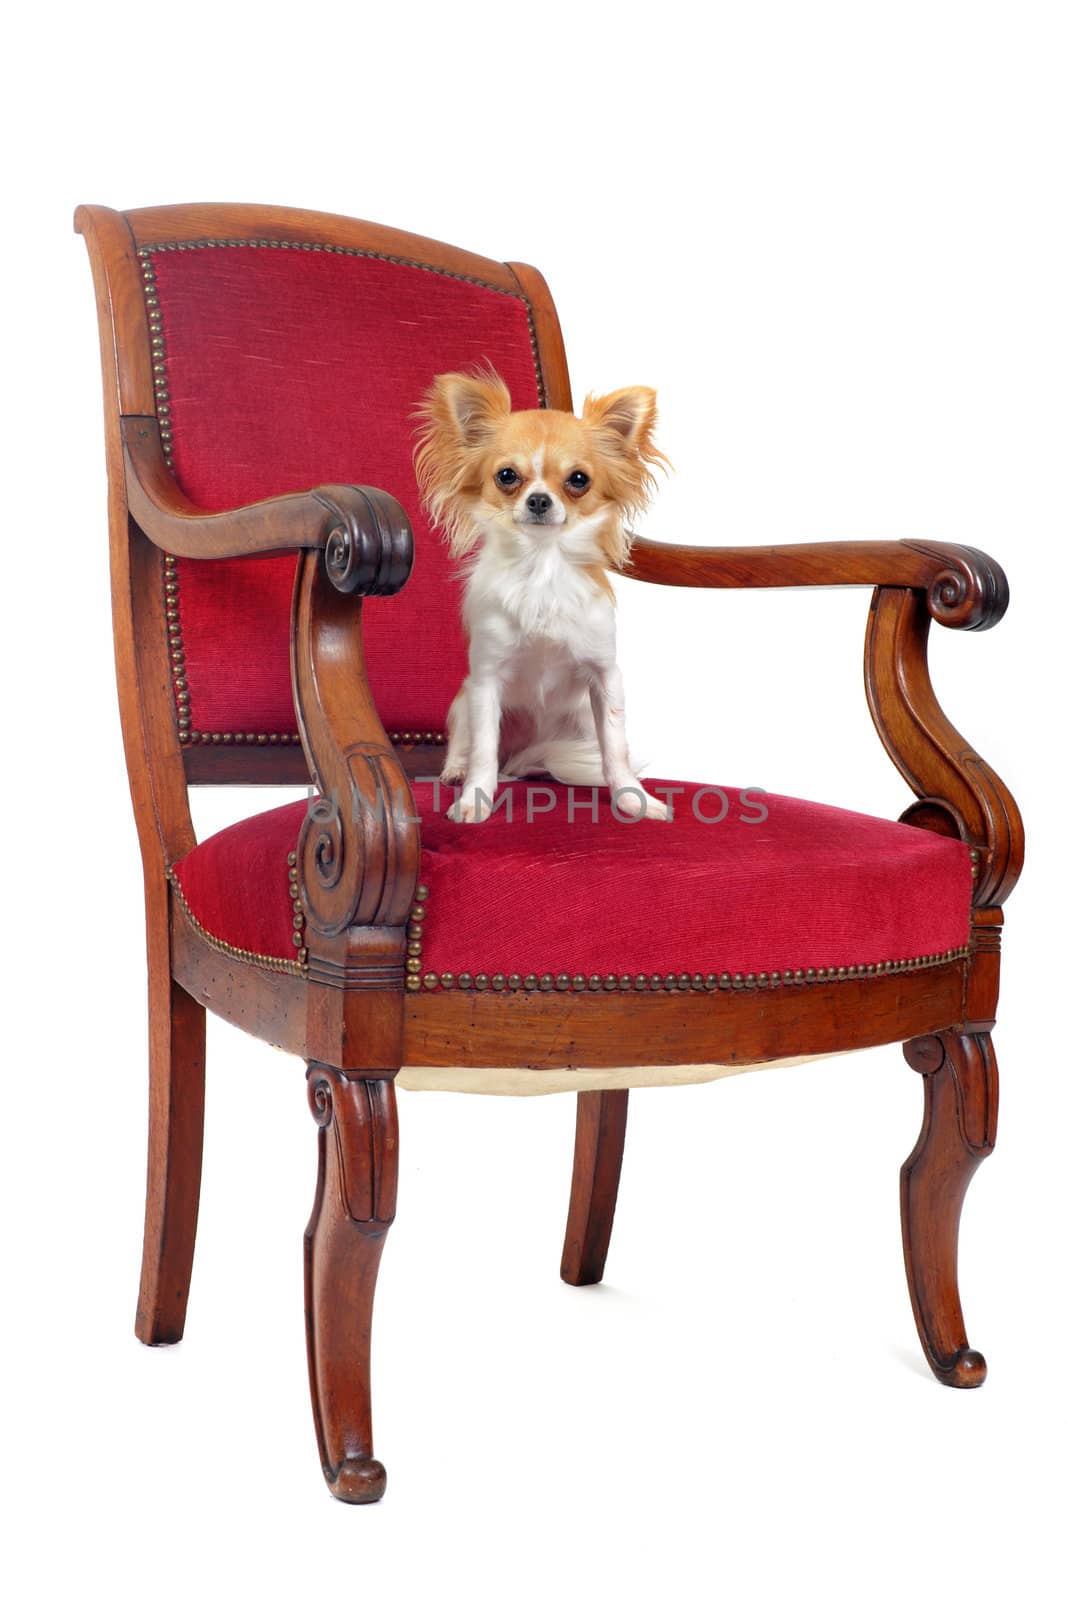 chihuahua sitting on an antique chair in front of white background